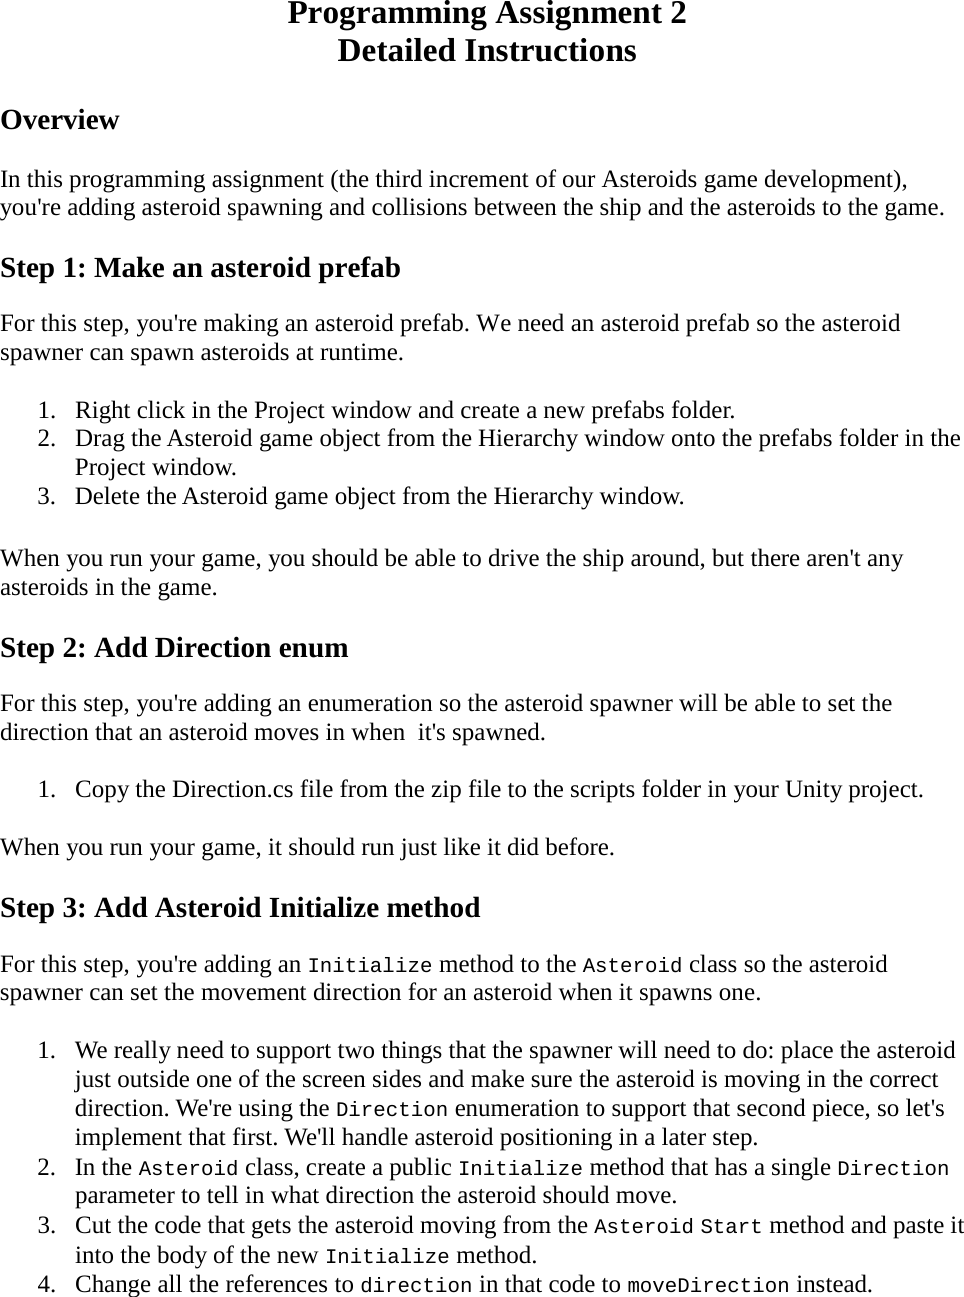 Page 1 of 4 - Chapter 3 2 Programming Assignment Detailed Instructions